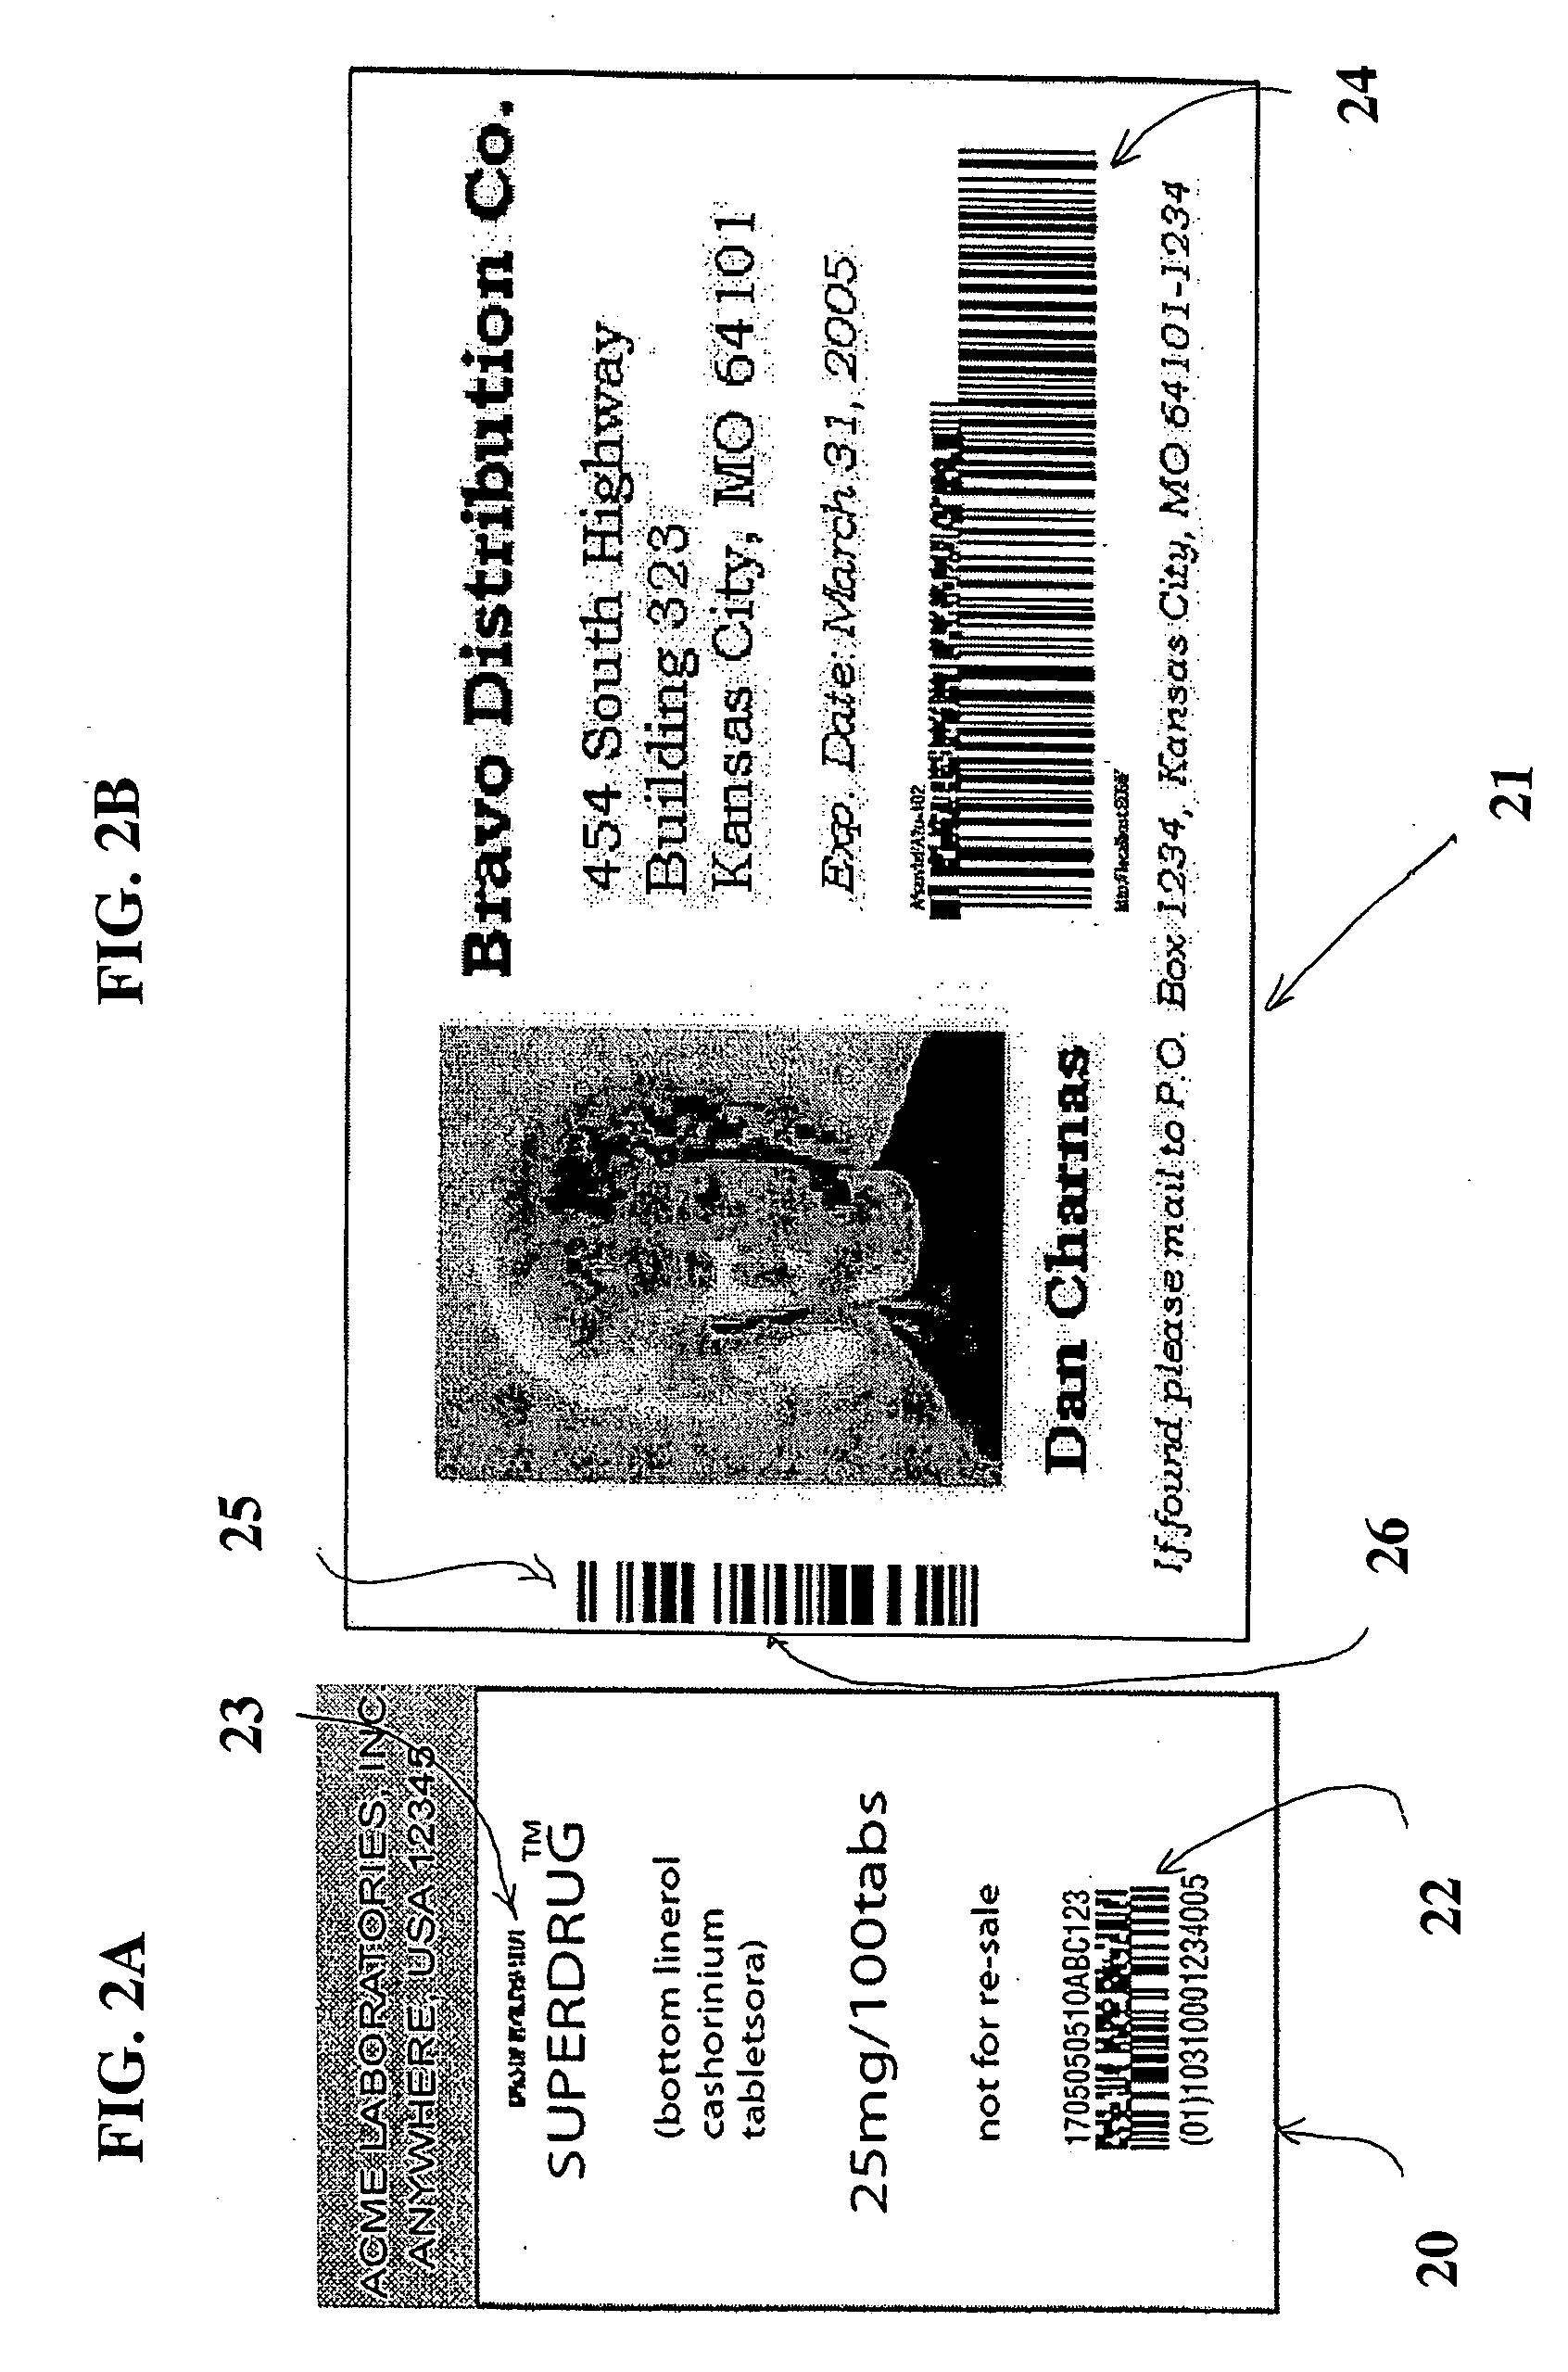 Method for improving security and enhancing information storage capability, the system and apparatus for producing the method, and products produced by the system and apparatus using the method